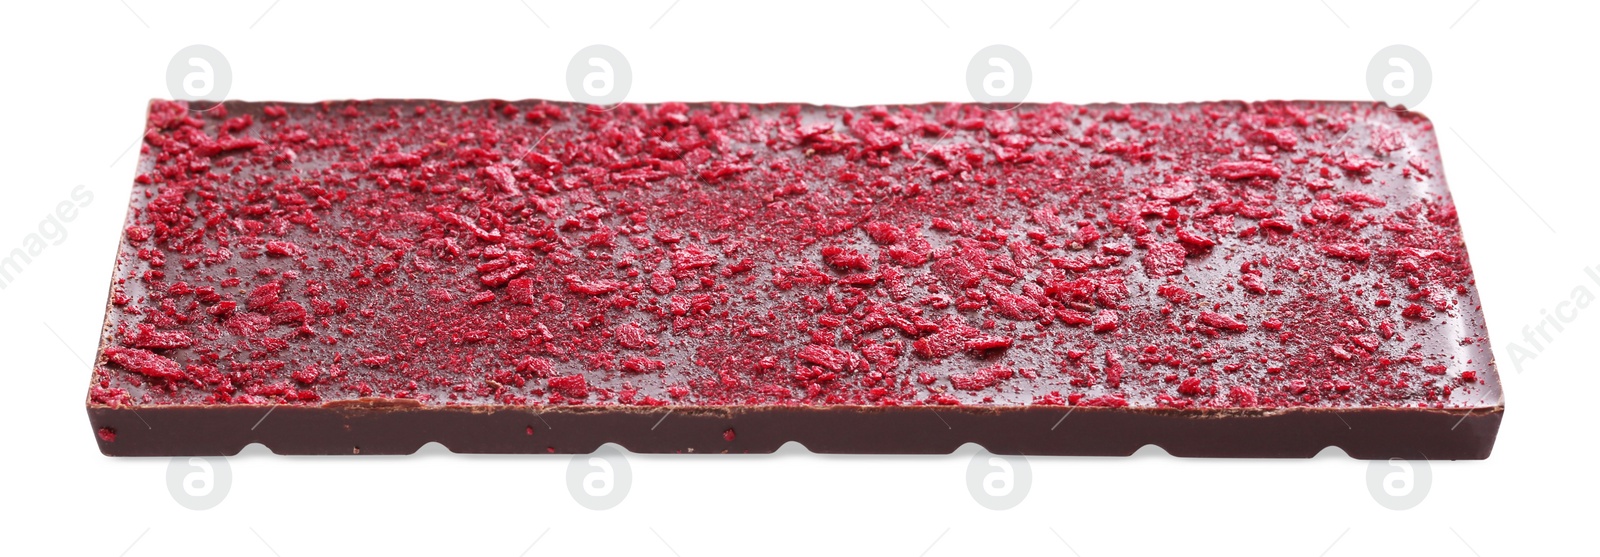 Photo of Chocolate bar with freeze dried fruits isolated on white